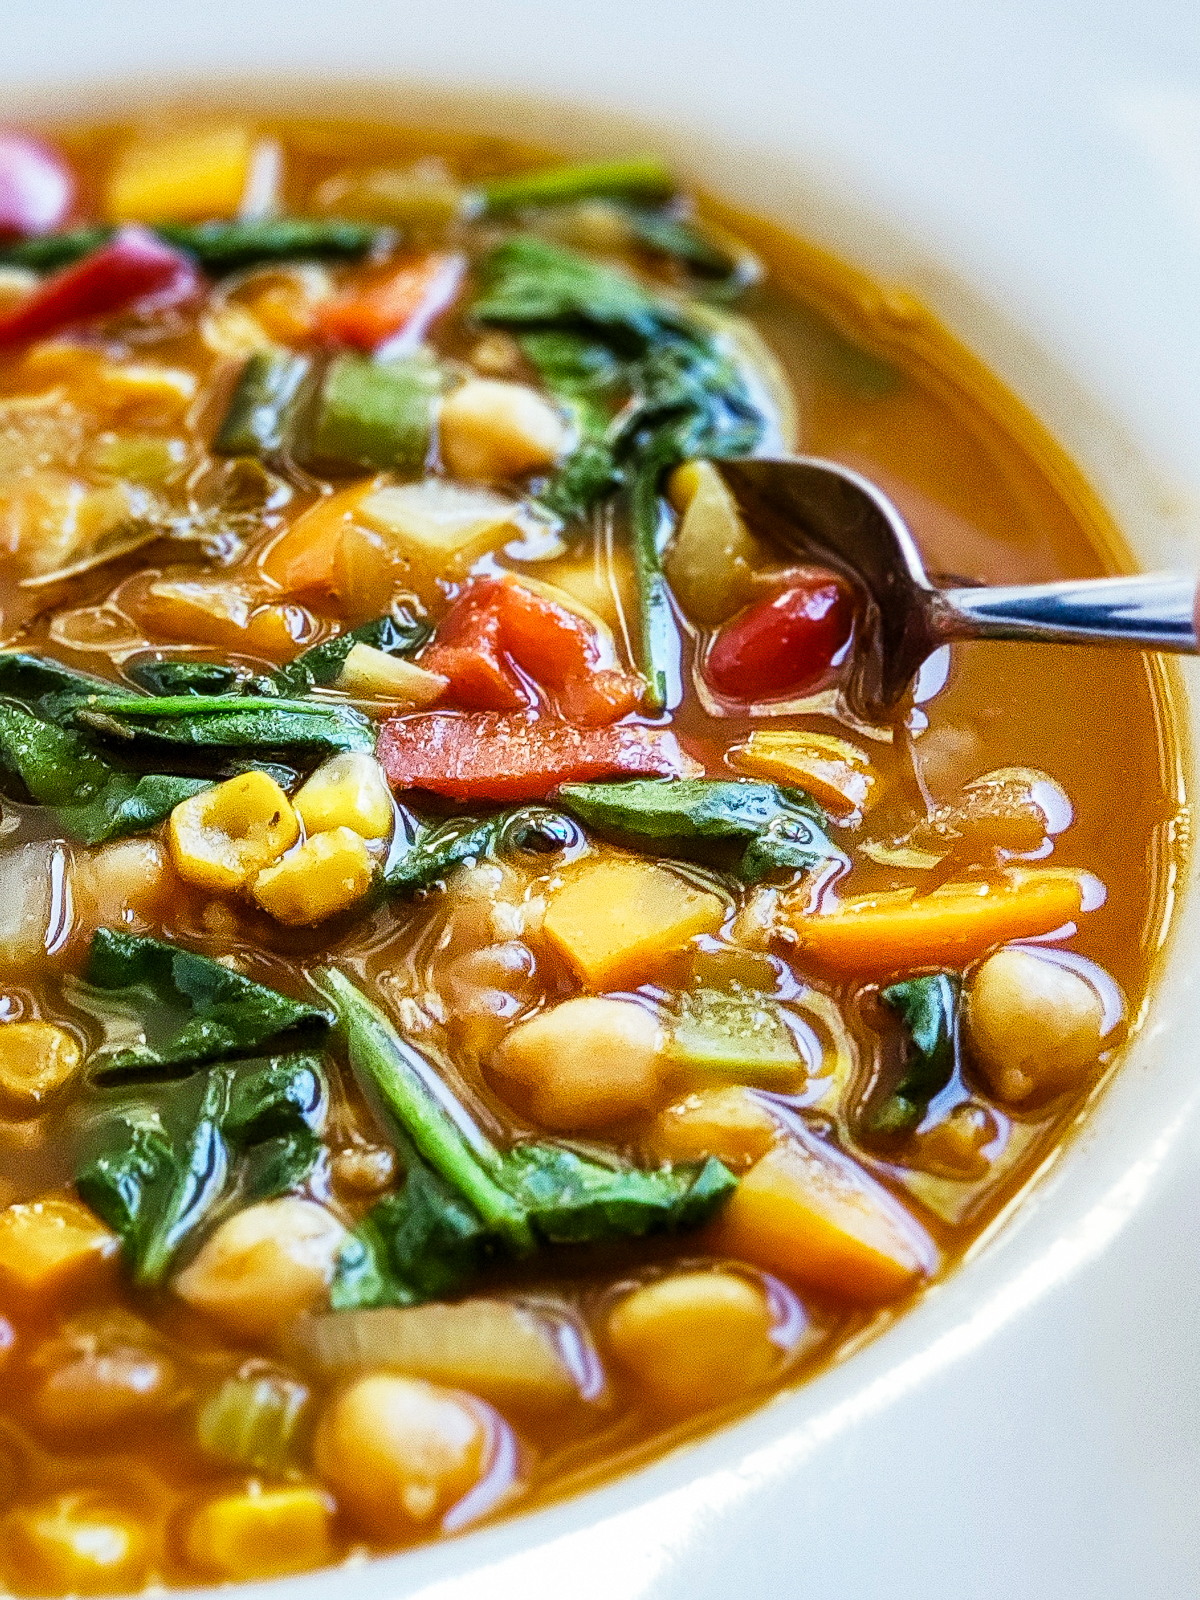 Close up of the vegetable soup full of corn kernels, green spinach, carrots and celery.